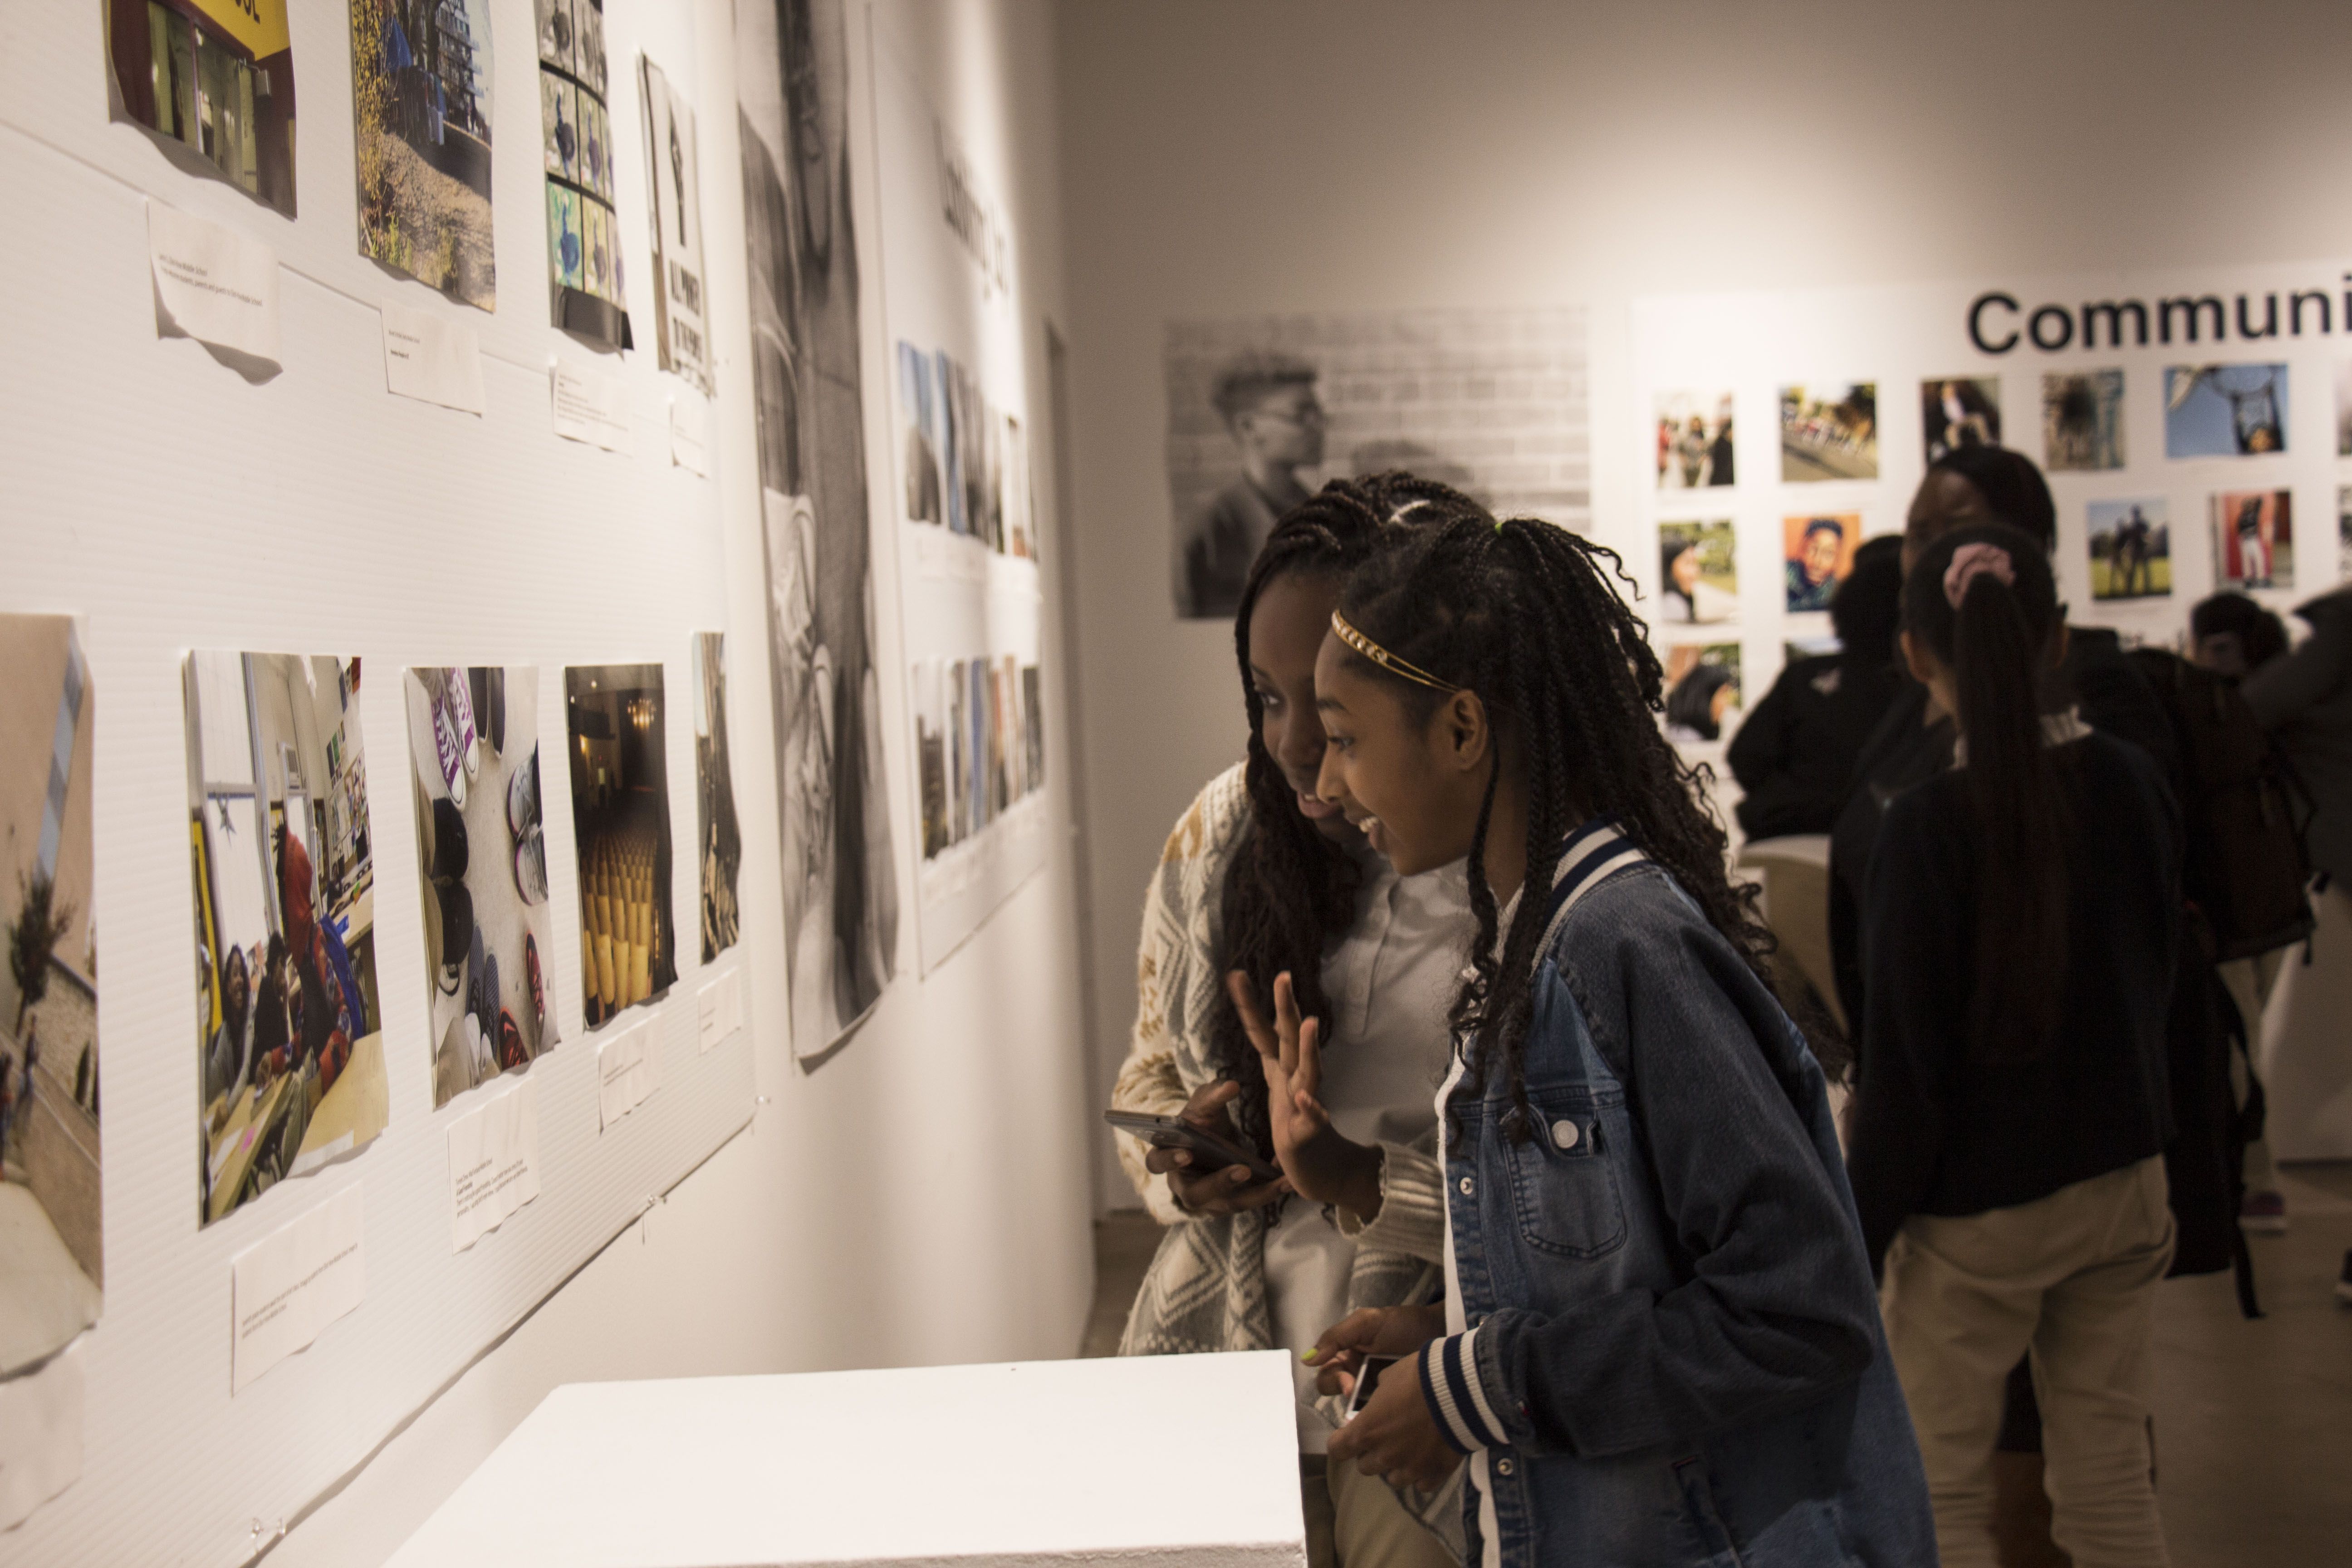 Students observe the Everyday DC Photography Exhibition to learn about photographing everyday life in Washington, DC. Image by Ifath Sayed. United States, 2017.